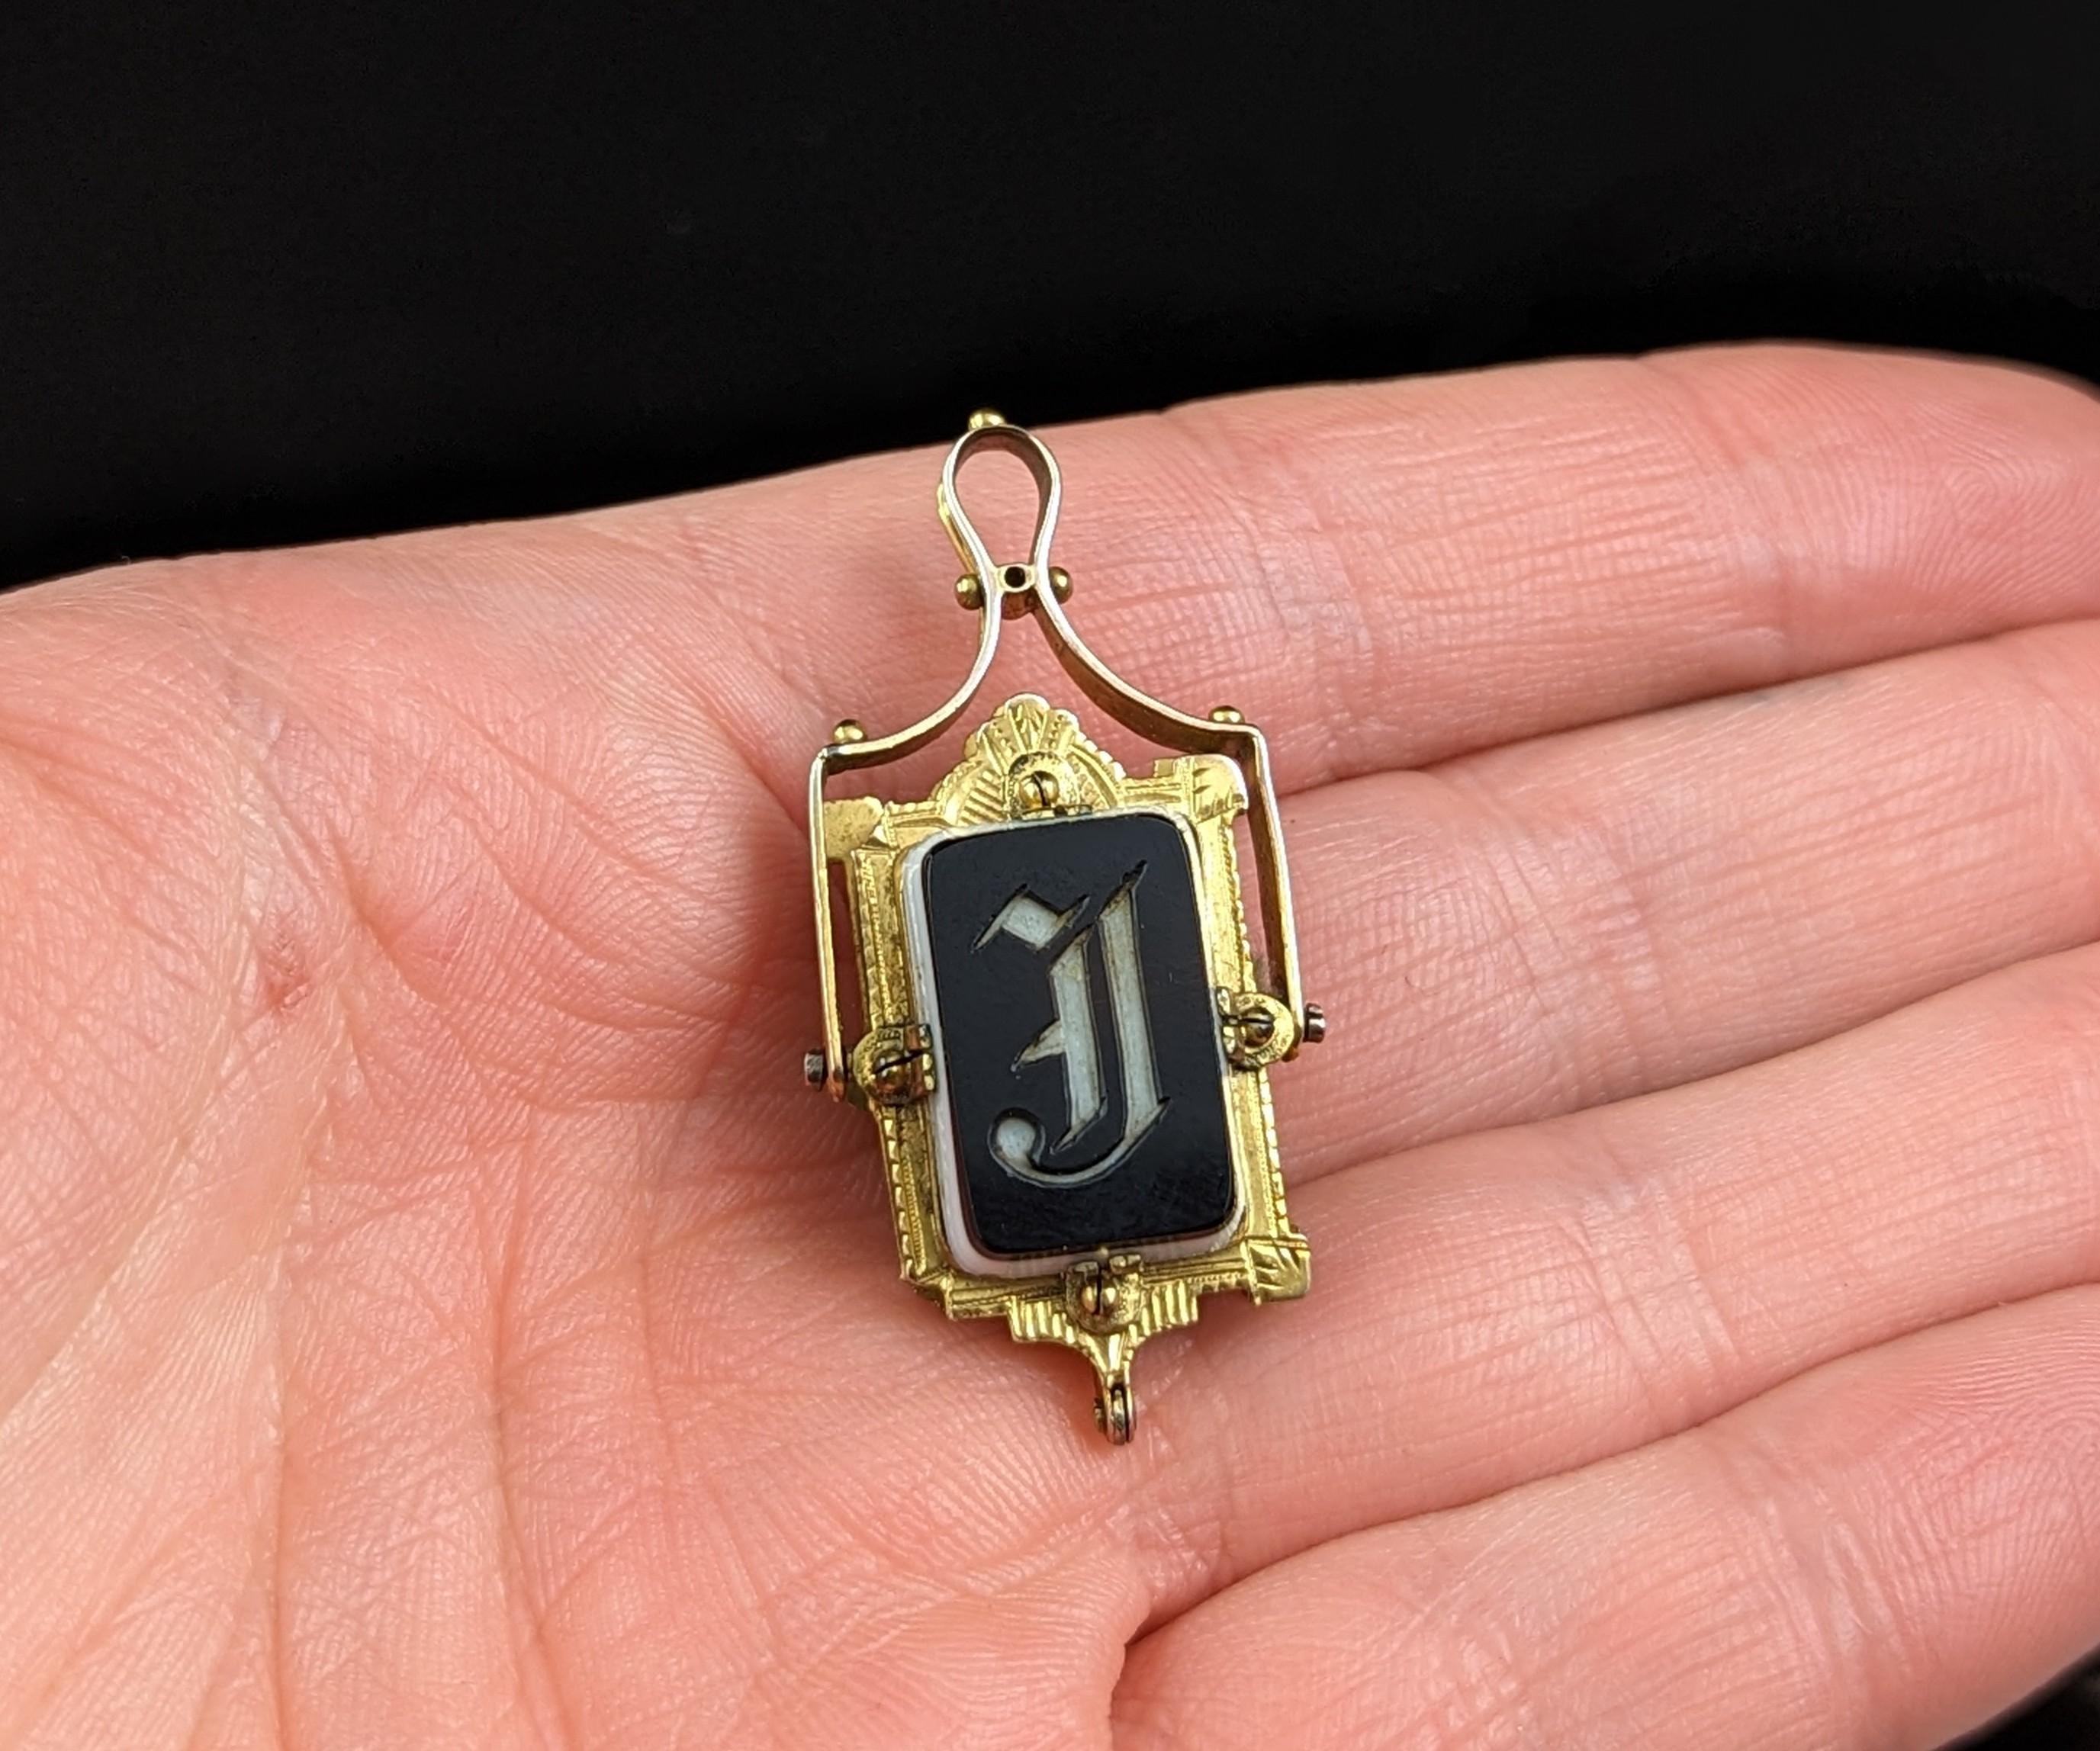 This antique swivel fob hide a great little feature, it is not just a swivel fob or even a pendant it is also a locket.

This little piece really is ticking off all the boxes!

An unusual and interesting Victorian piece, almost certainly